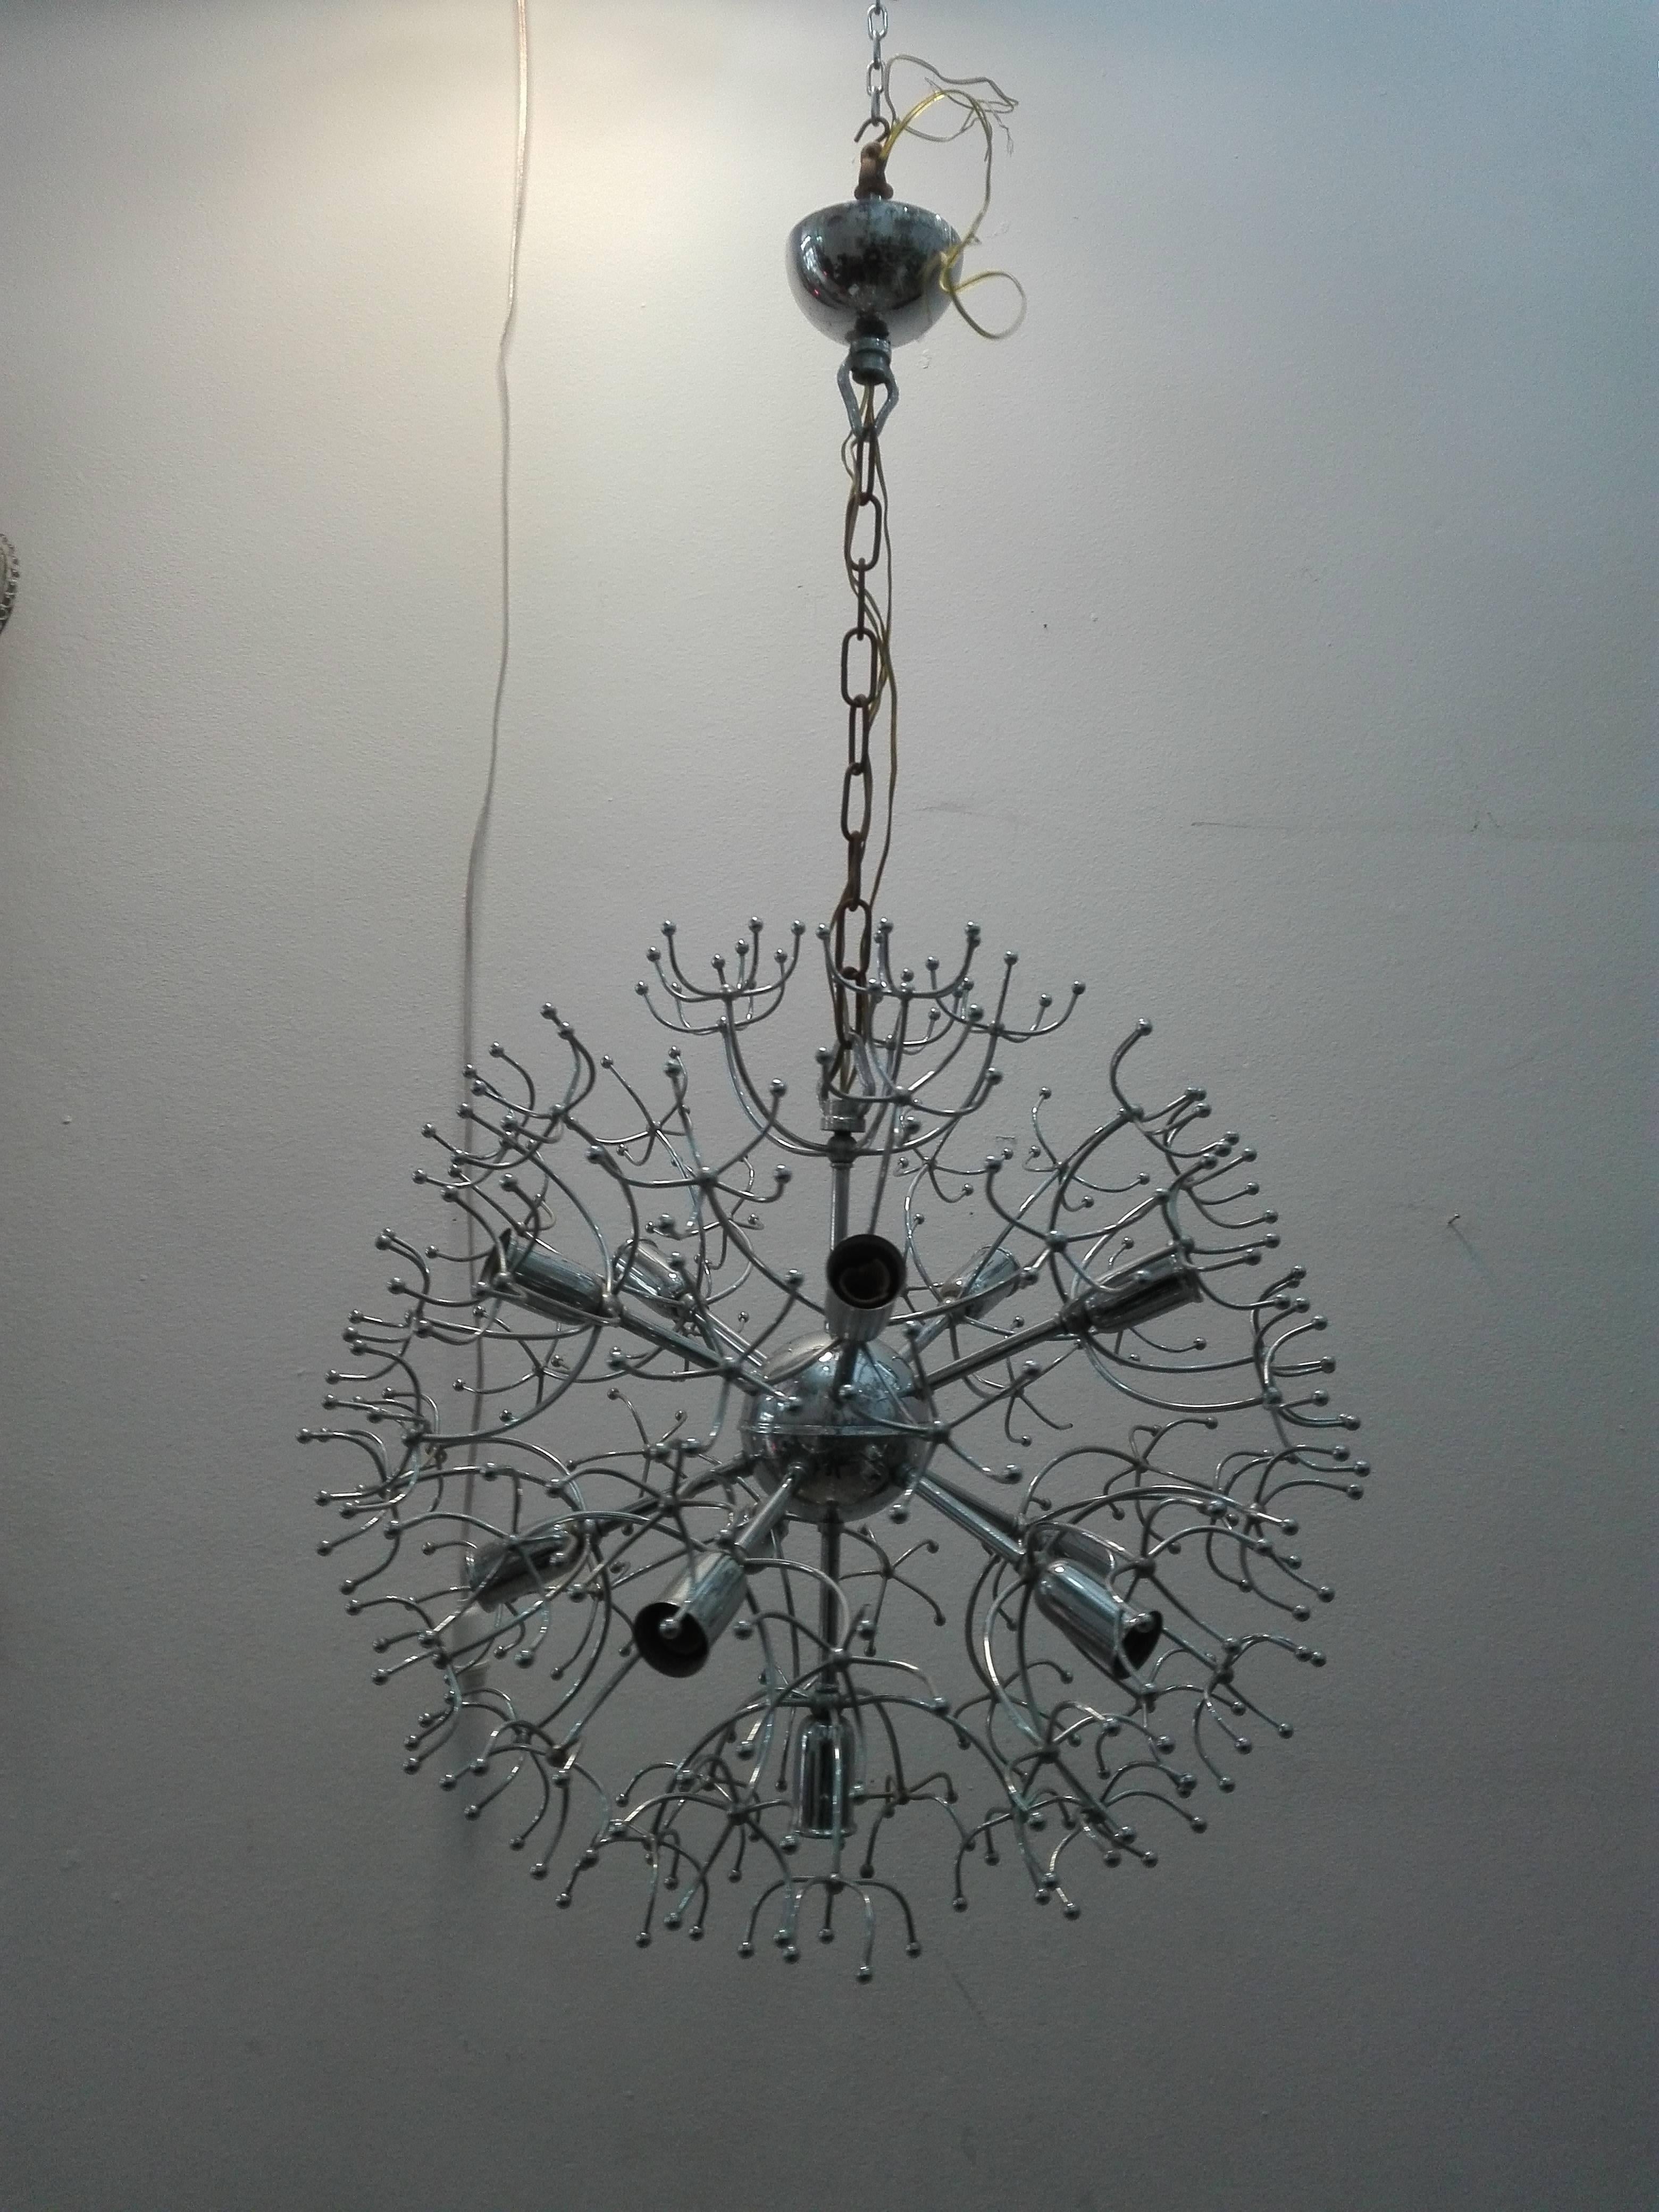 Sputnik chandelier designed by Gaetano Sciolari in the 1960s. The light features in central silver with 11 arms with 11 bulbs attached. Each stem has five smaller stems and then a further five stems.